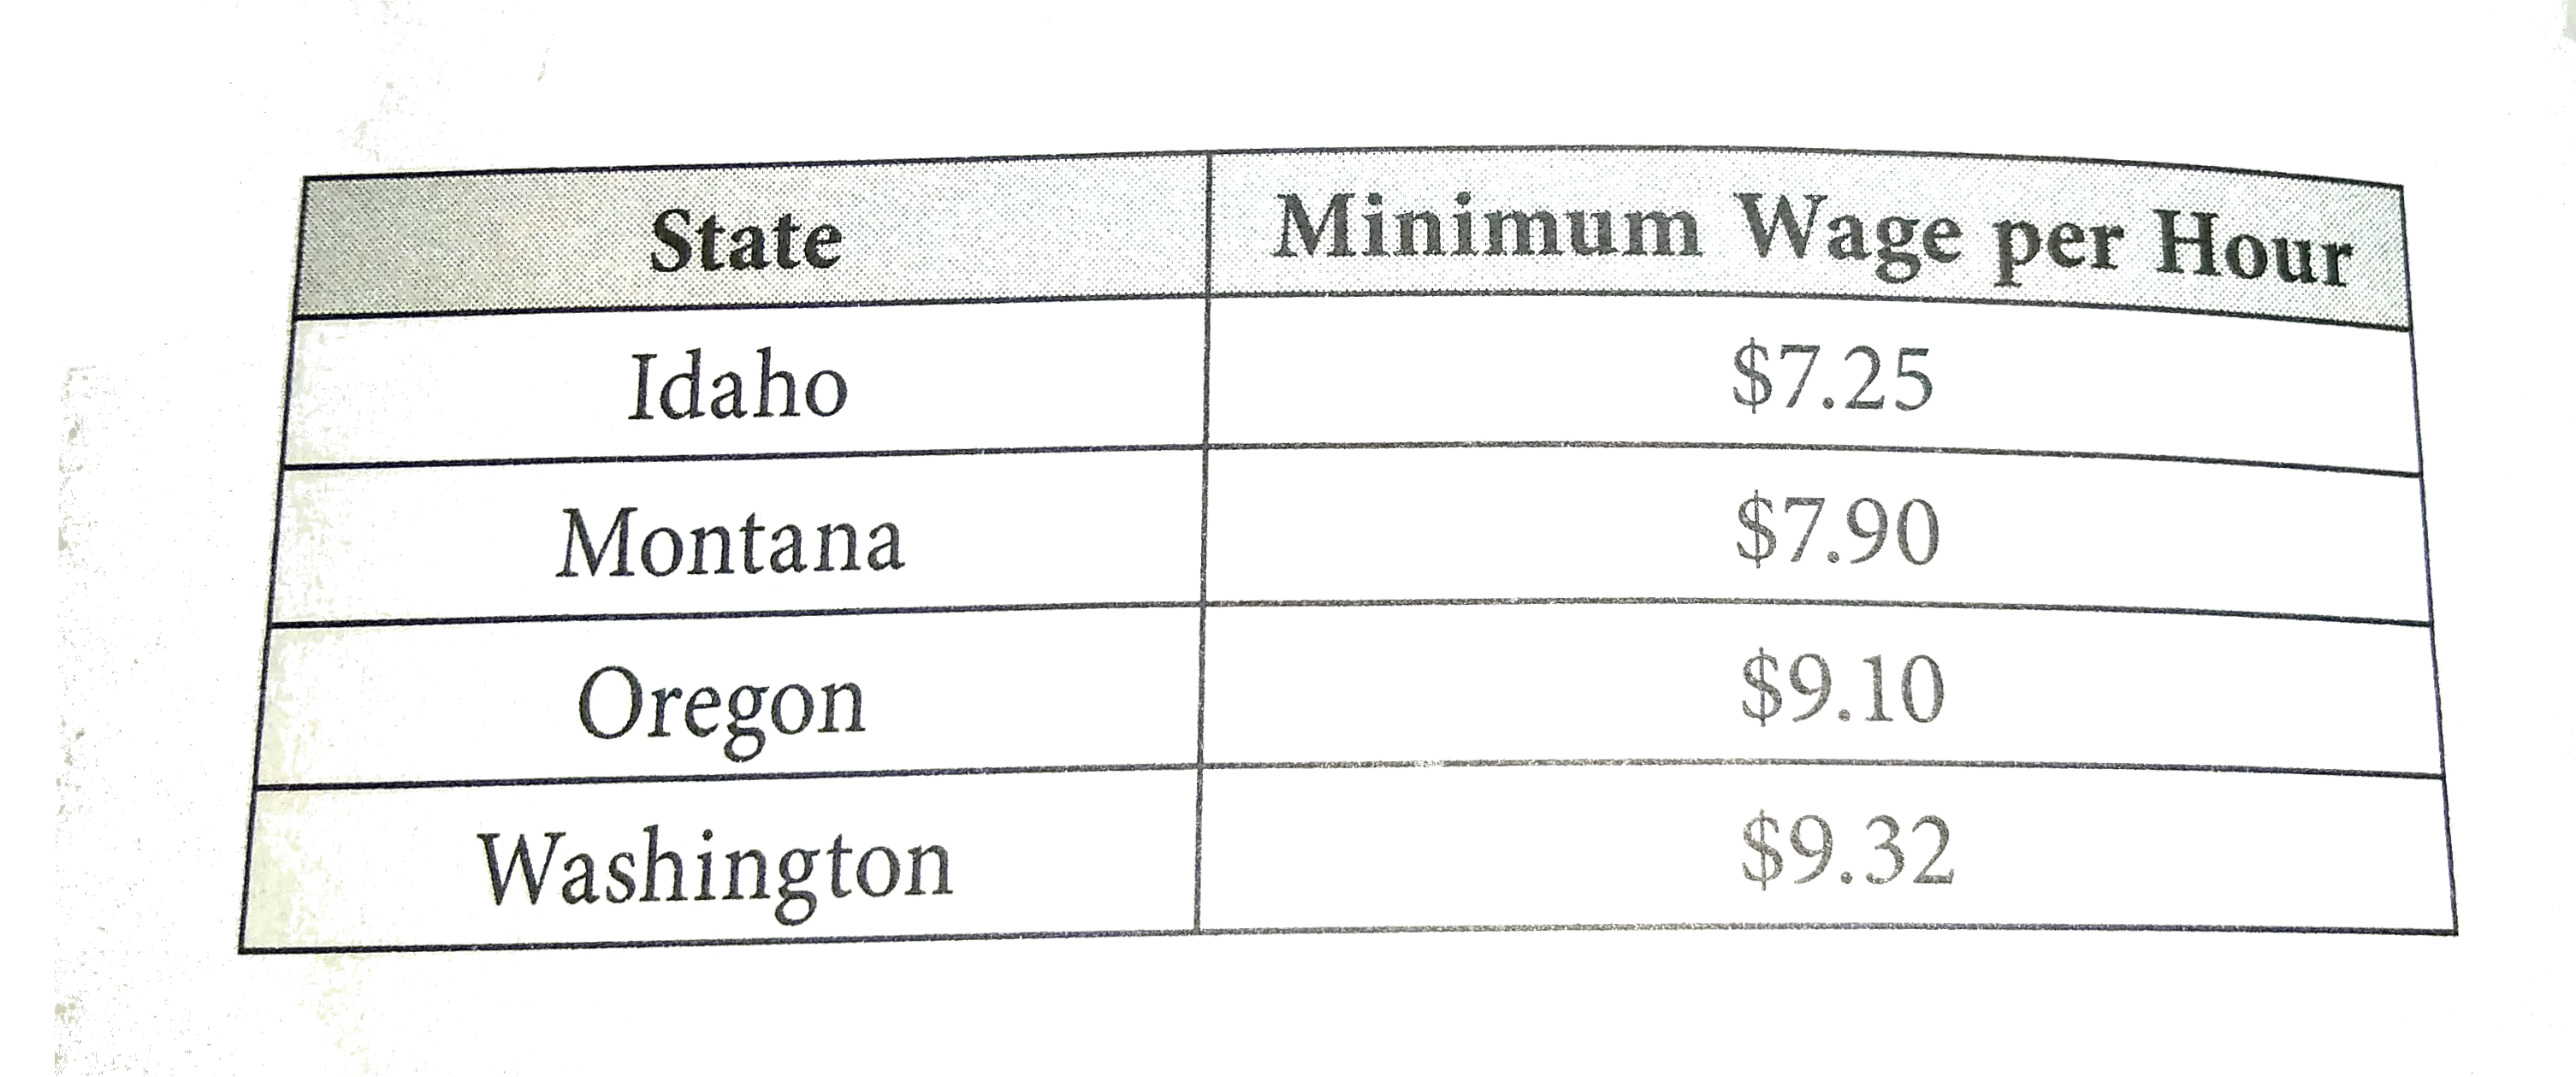 The table above shows the 2014 minimm wages for several states that share a border. Assuming an average workweek of between 35 and 40 hours, which inequality represents how much more a worker who earns minimum wage can earn per week in Oregon than in Idaho?